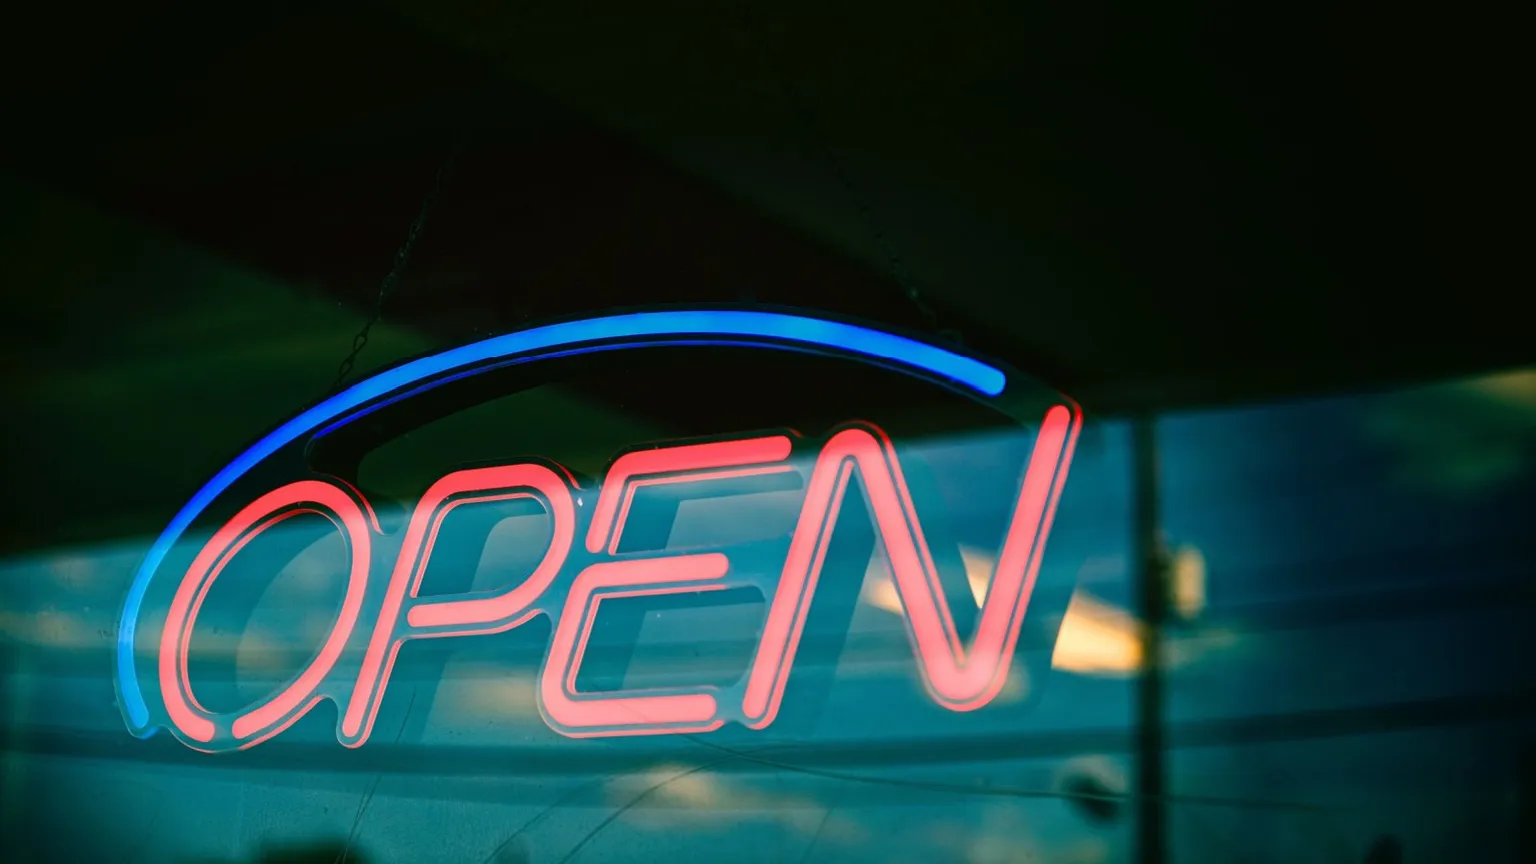 Open for business. Source: Shutterstock